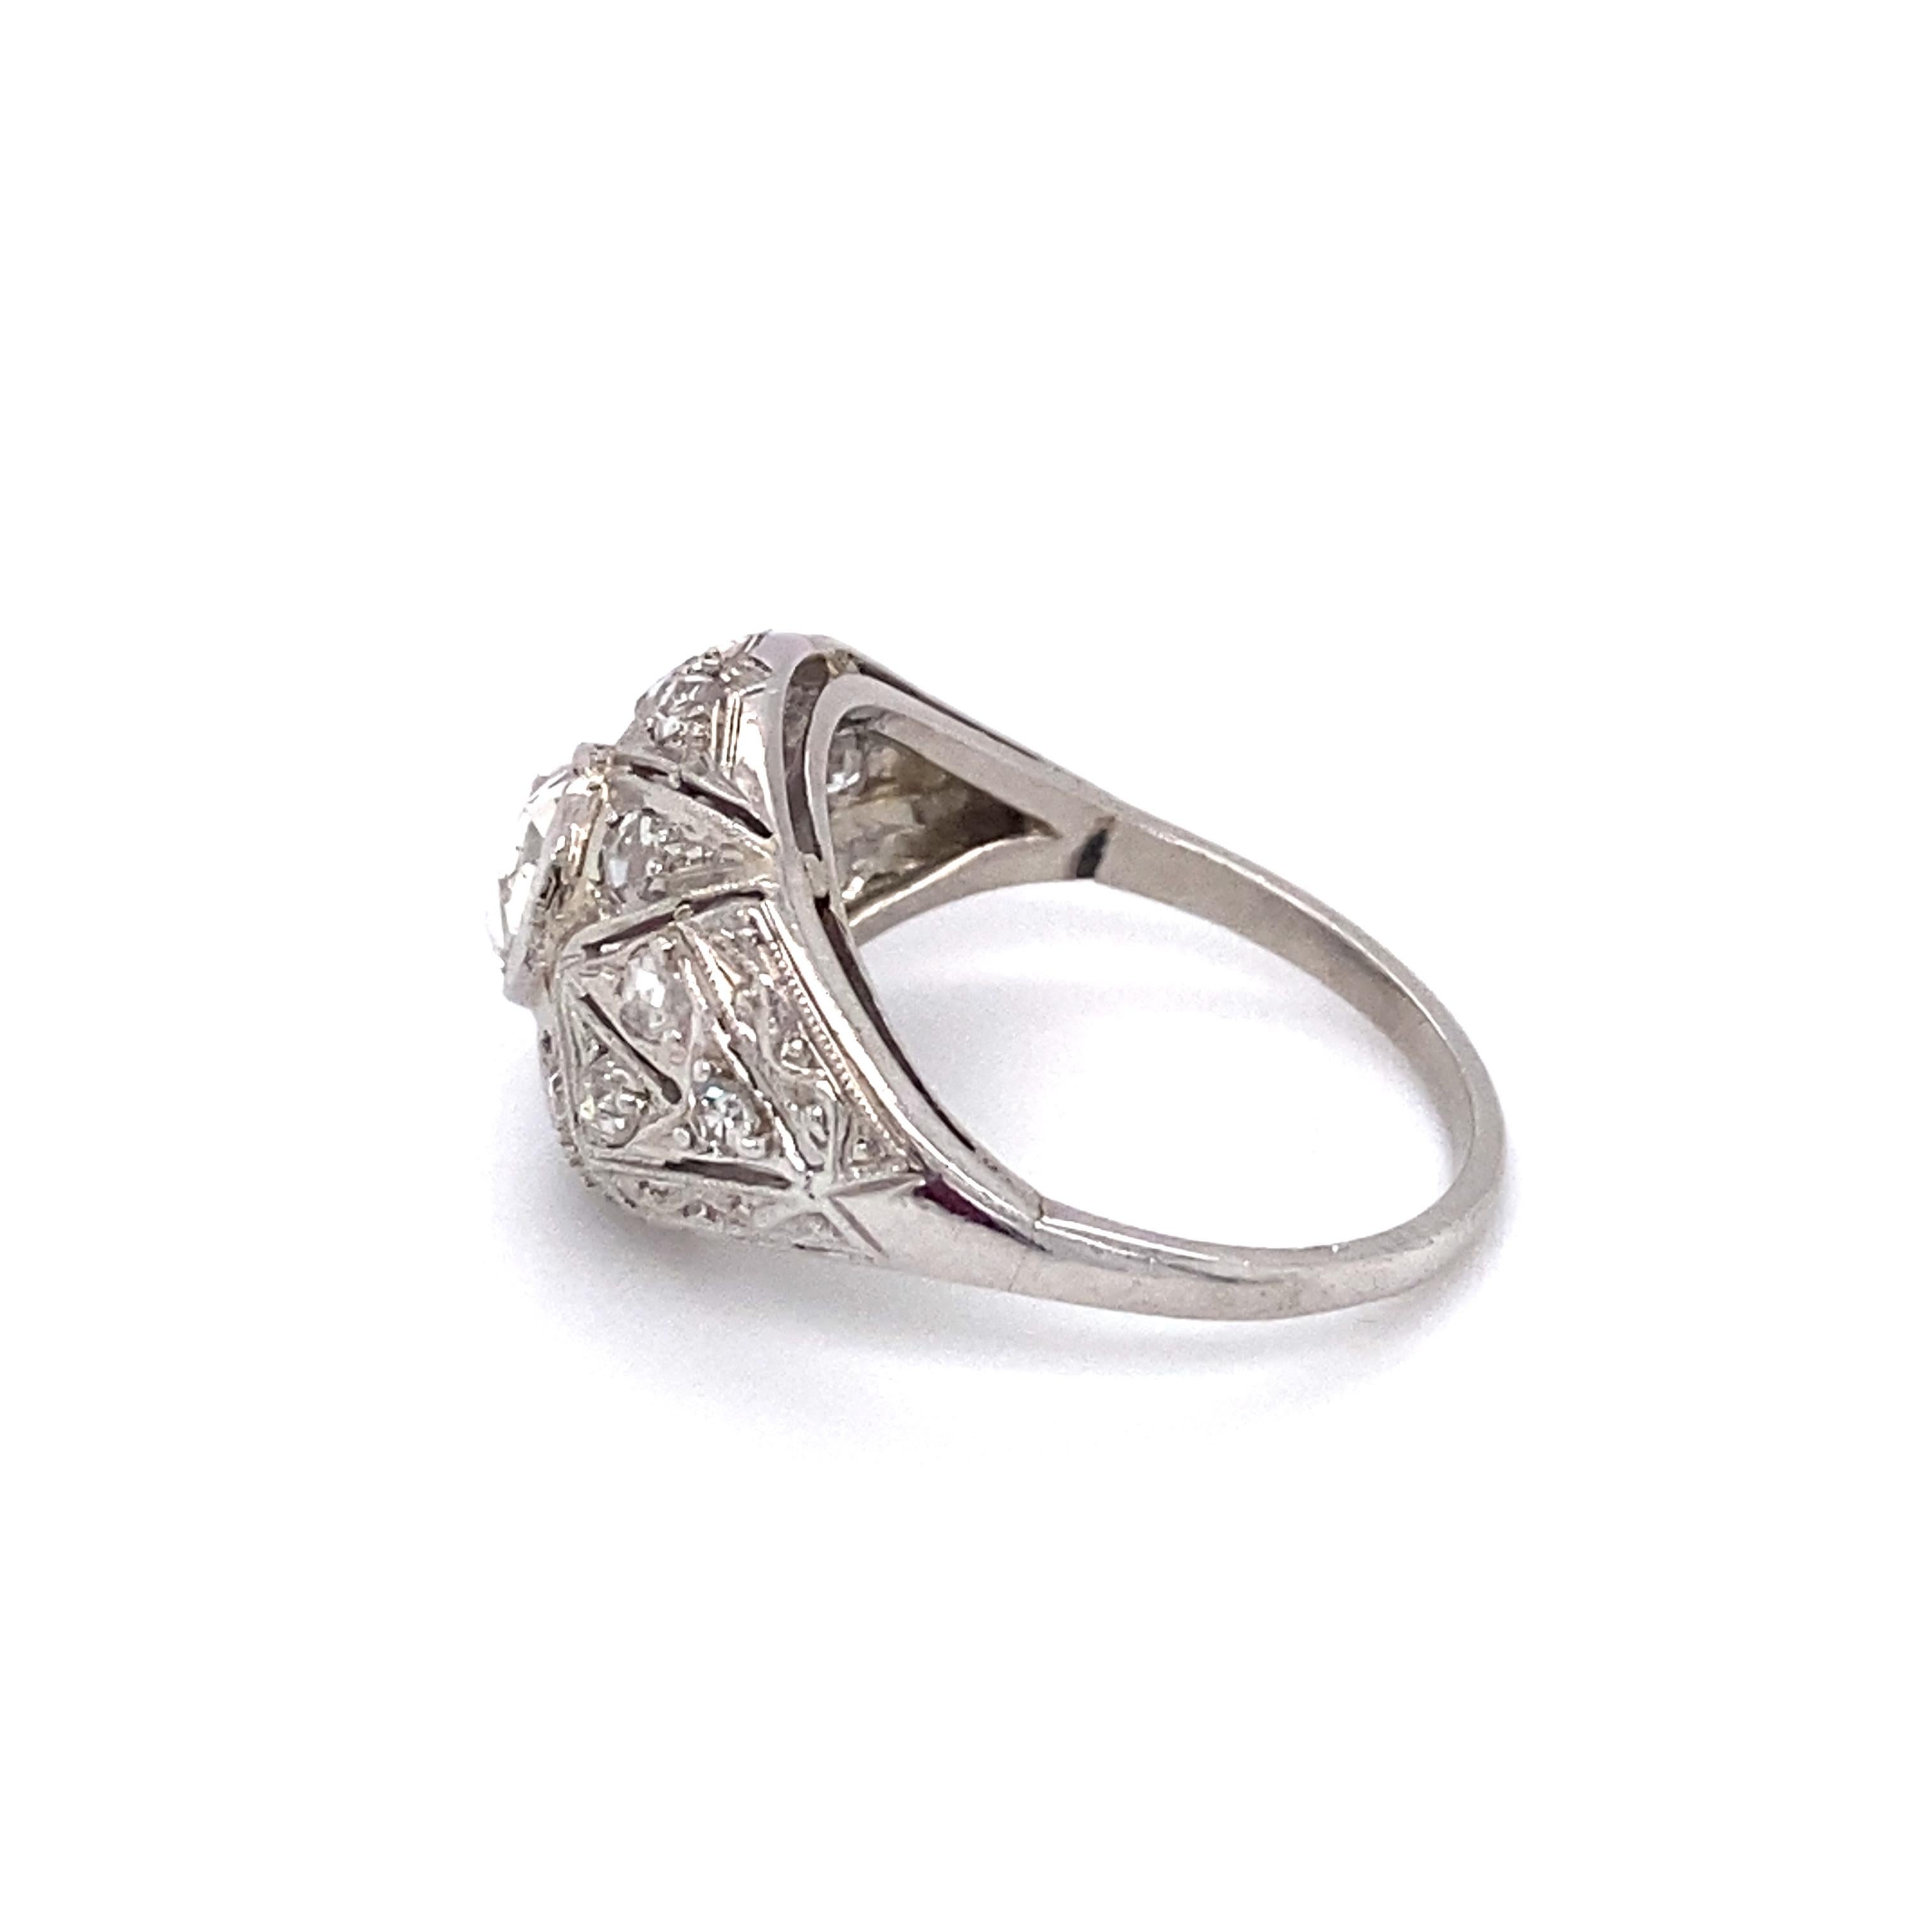 Circa 1890s Victorian Rose Cut Diamond Ring in Platinum and 14K White Gold In Good Condition For Sale In Addison, TX